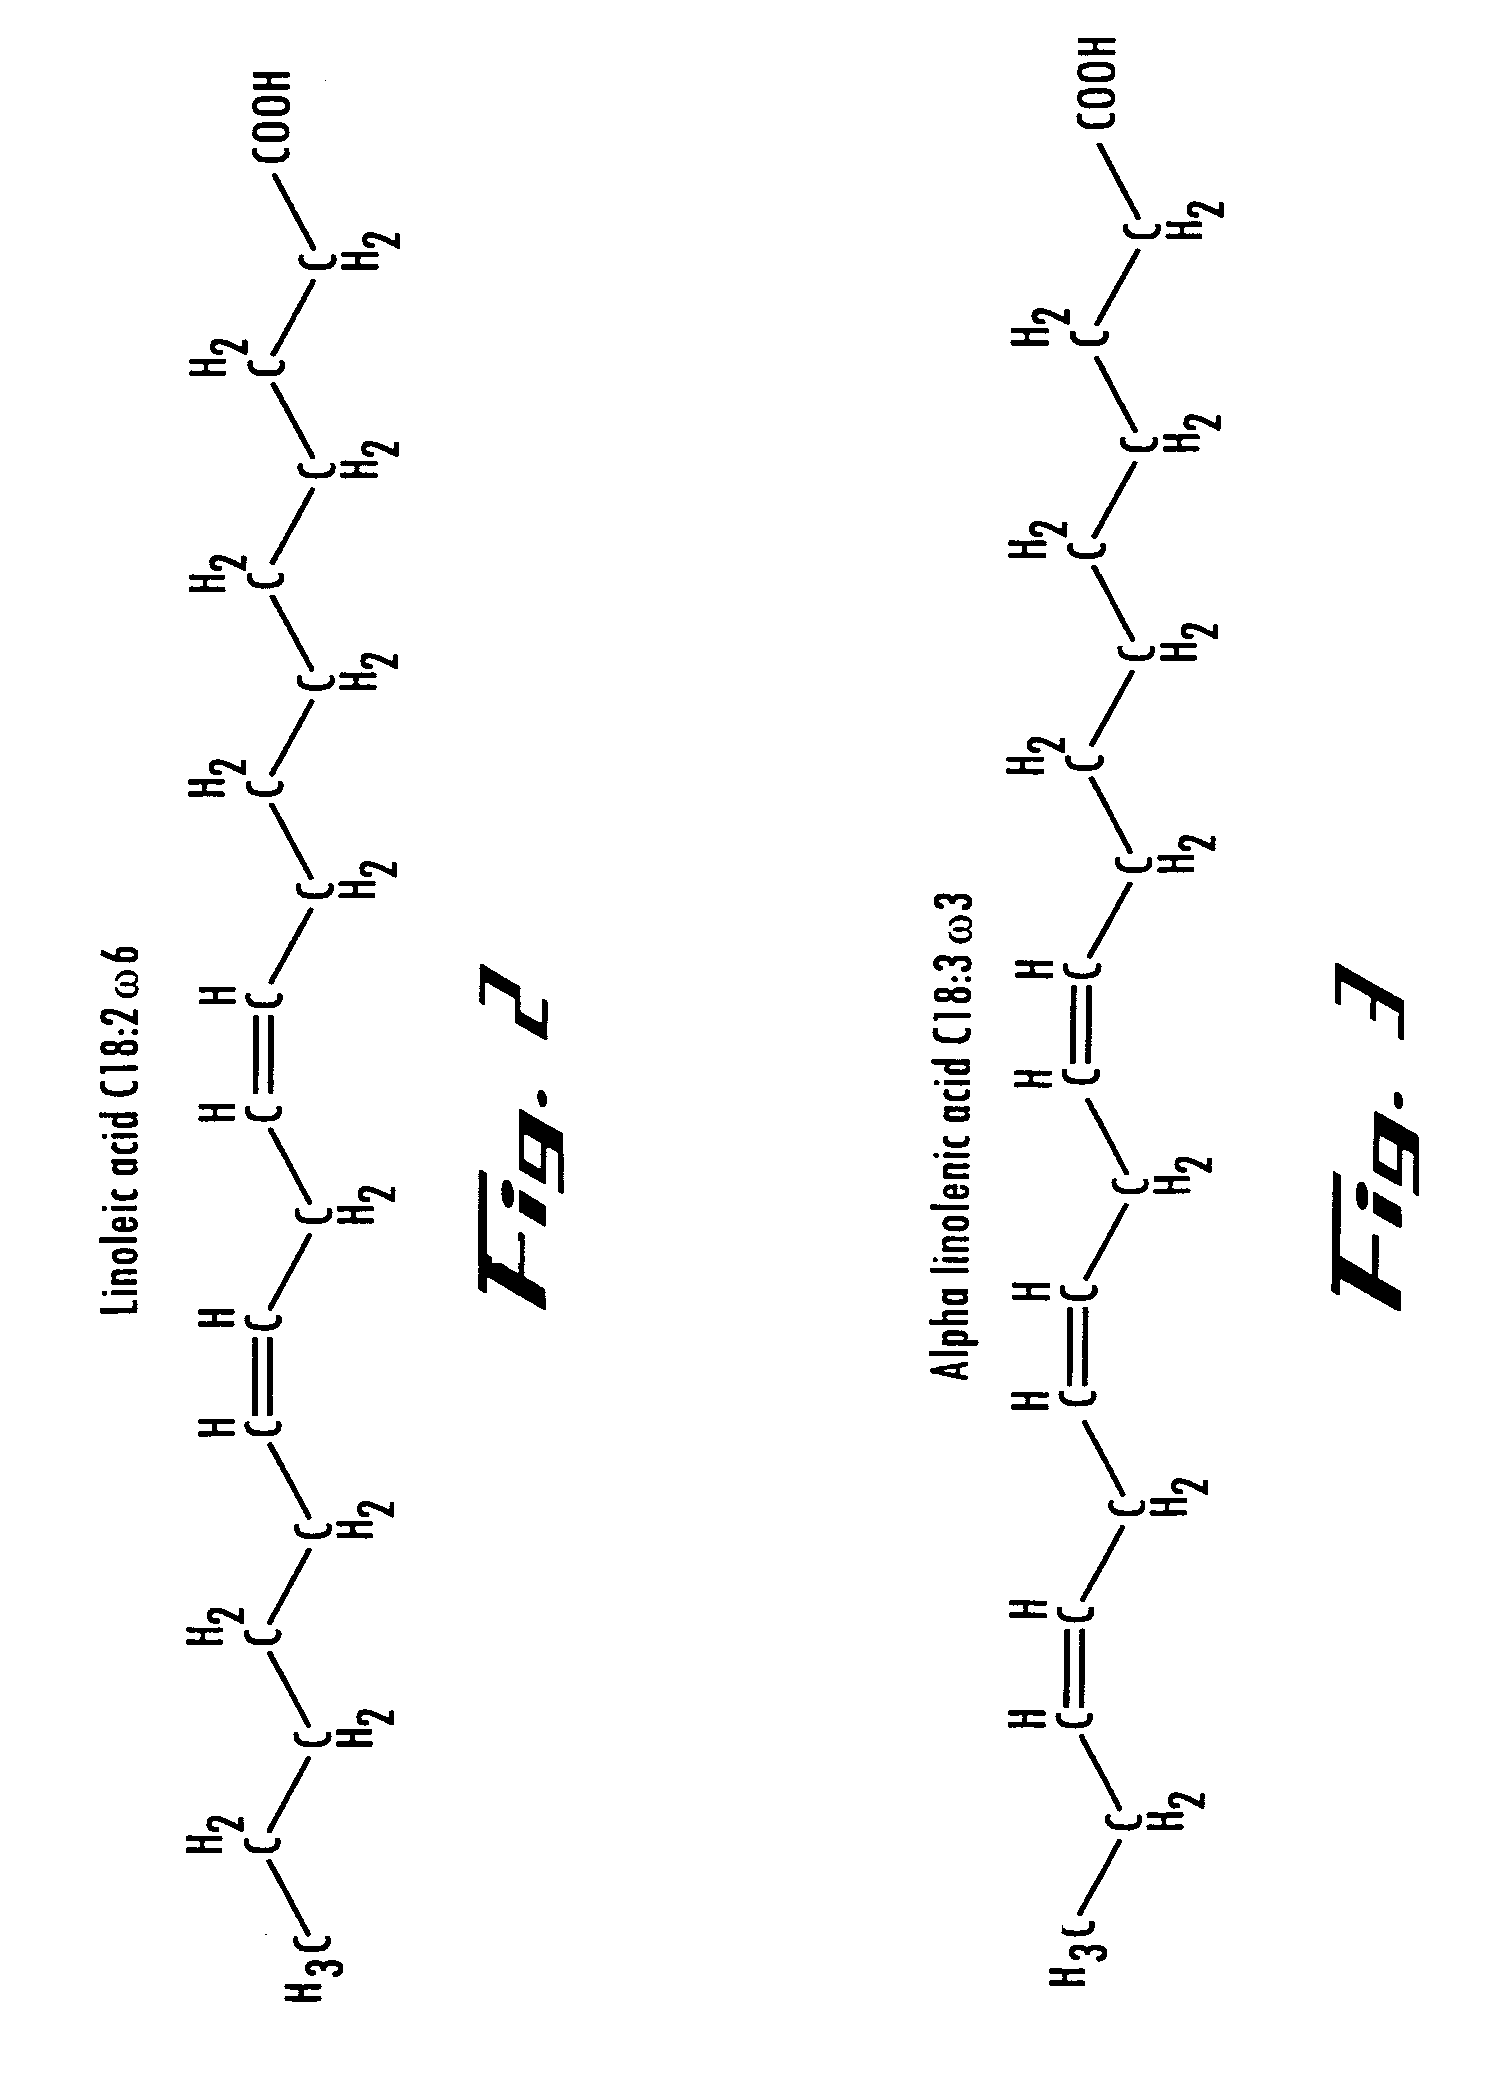 Method of electro-catalytic reaction to produce mono alkyl esters for renewable biodiesel